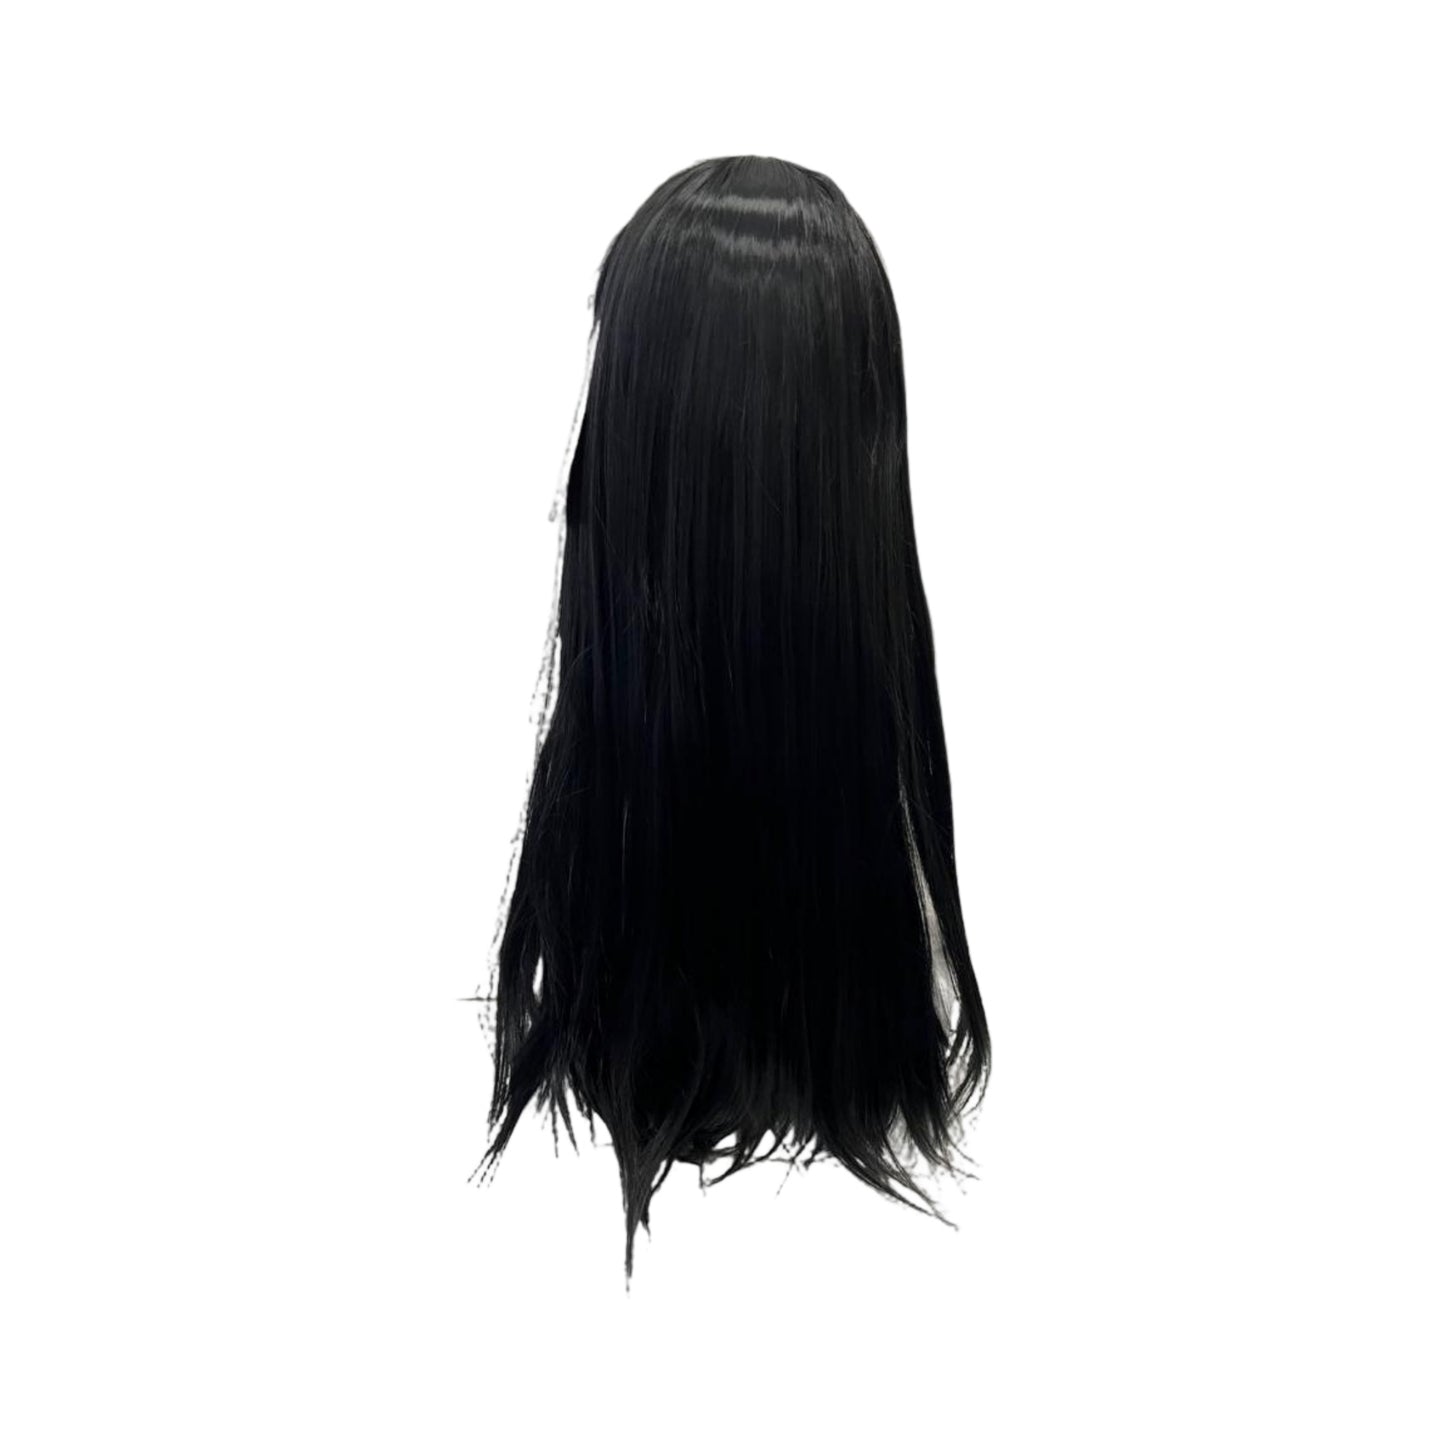 Long Synthetic Wig (#1) | A-008 | 28 inches | Durable | Breathable Cap